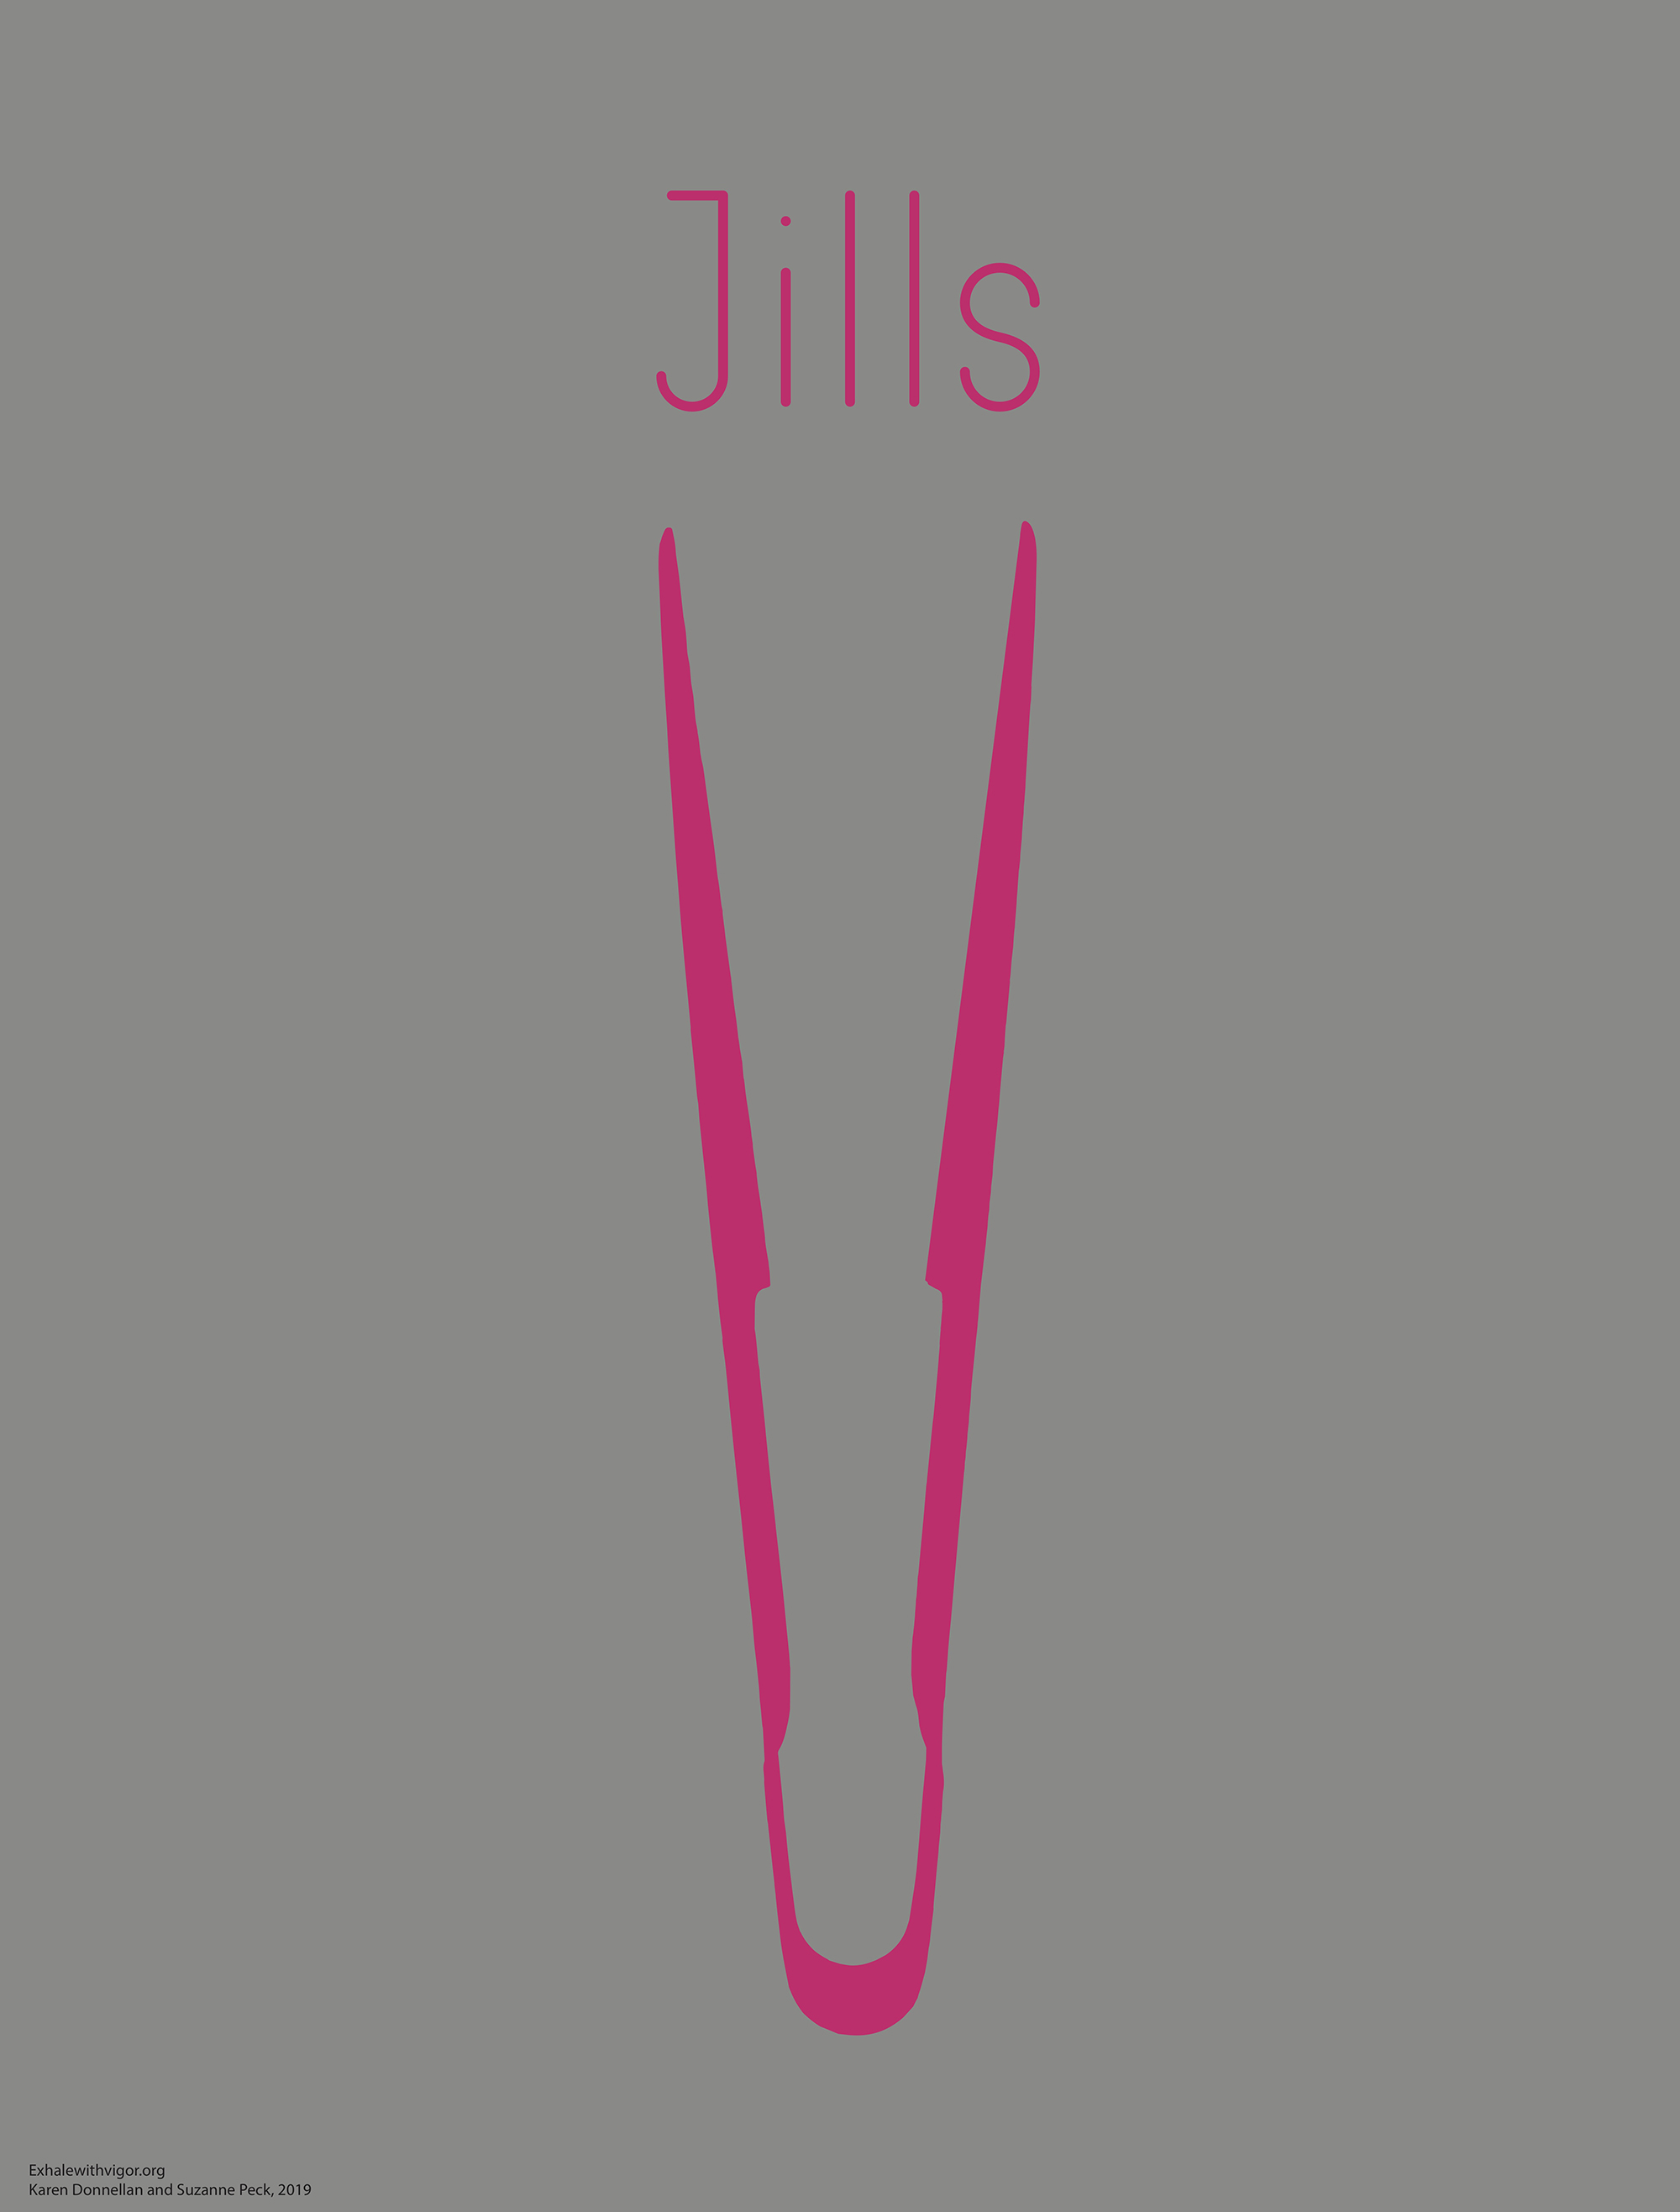 A poster with a large V and the text Jills.